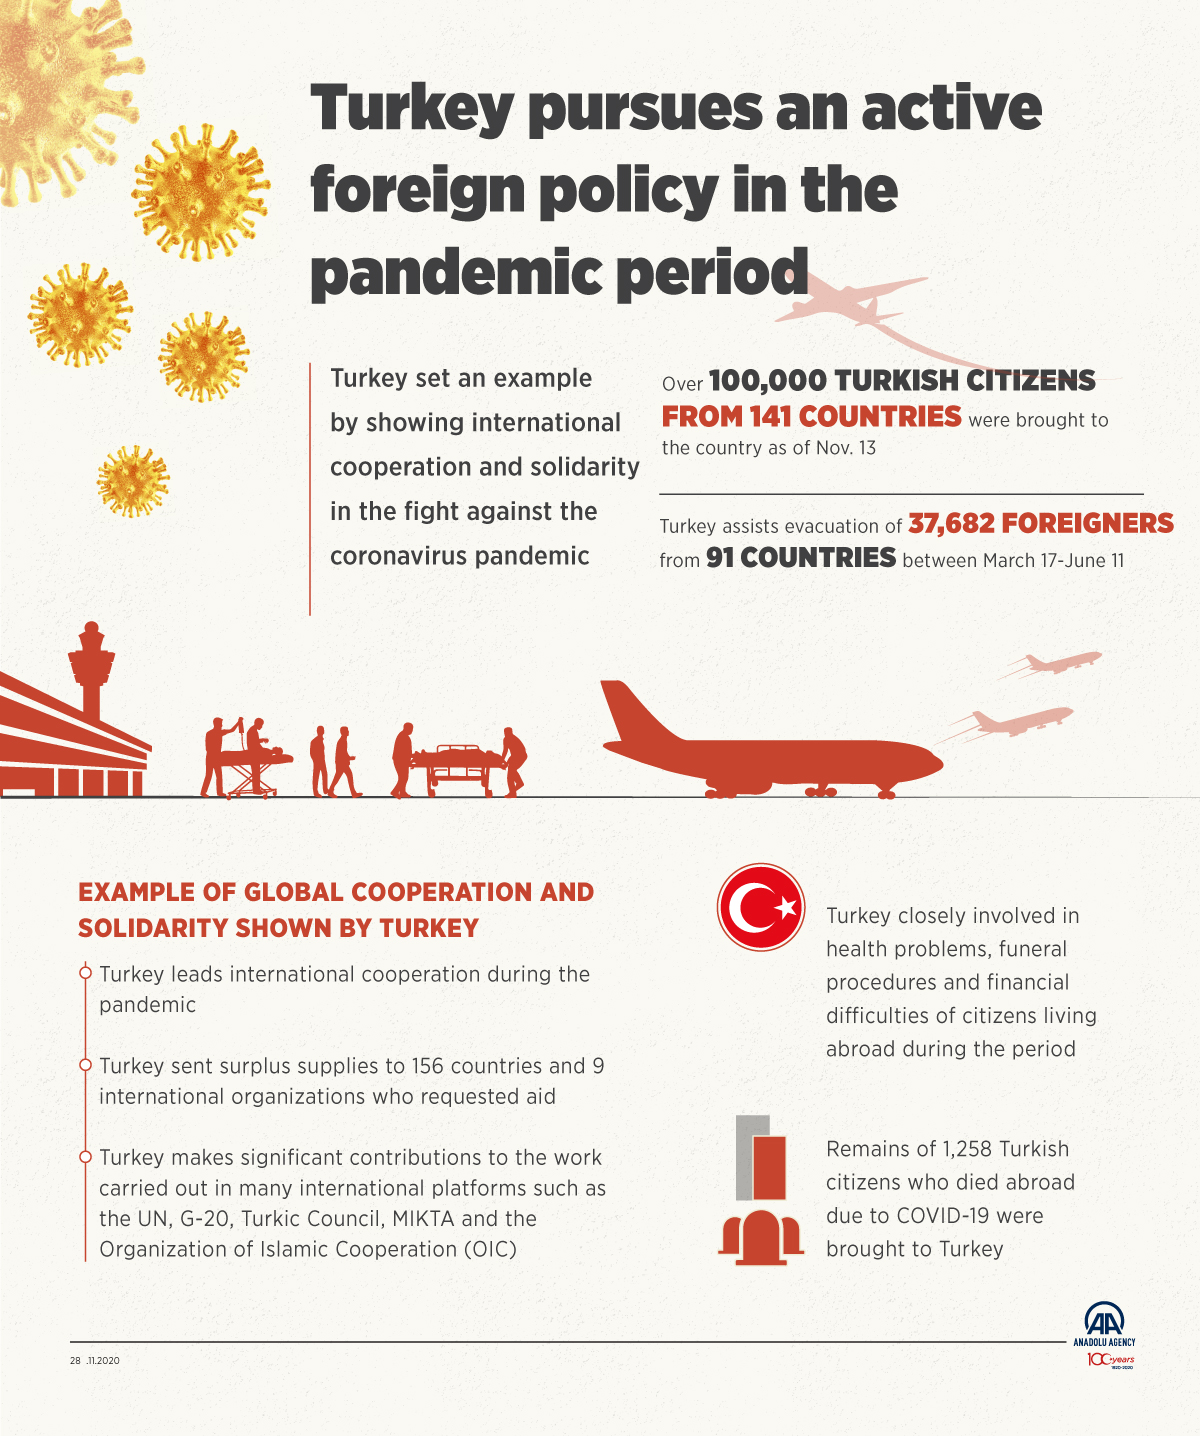 Turkey pursues an active foreign policy in the pandemic period